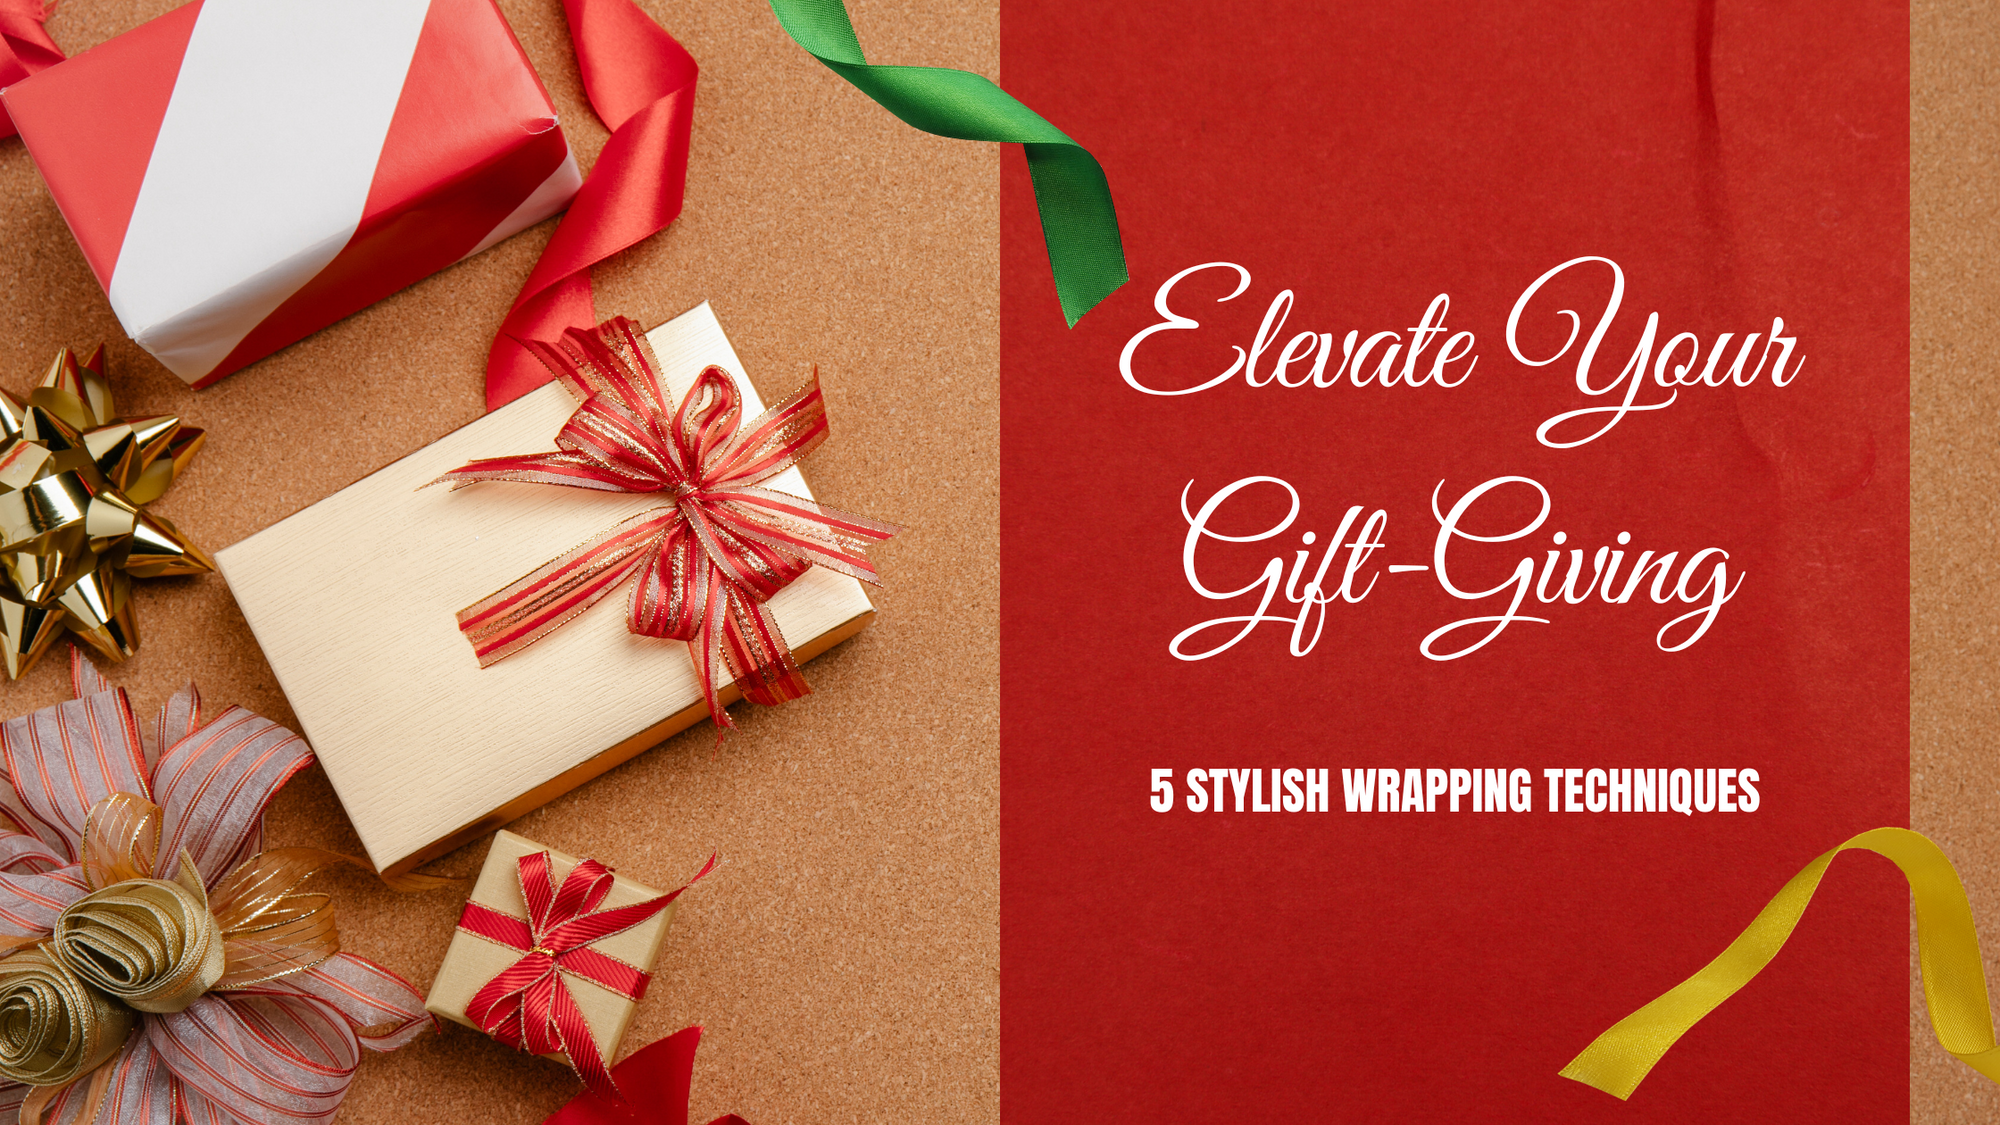 Elevate Your Gift-Giving: 5 Stylish Wrapping Techniques